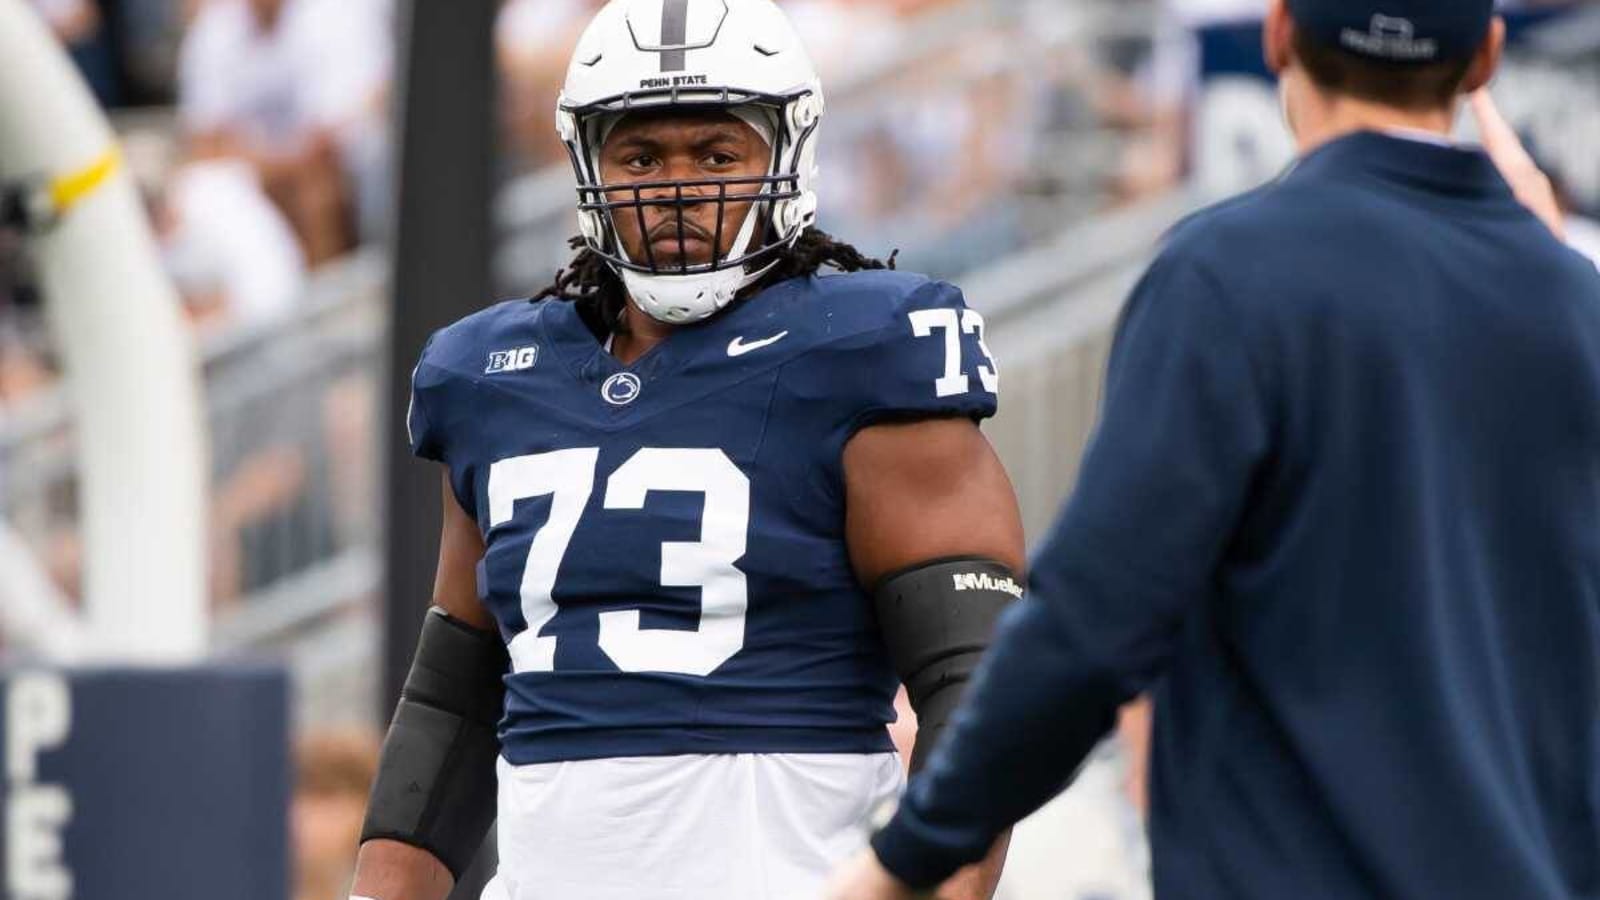 Kansas City Chiefs have top 30 visit with athletic offensive tackle in Caedan Wallace out of Penn State